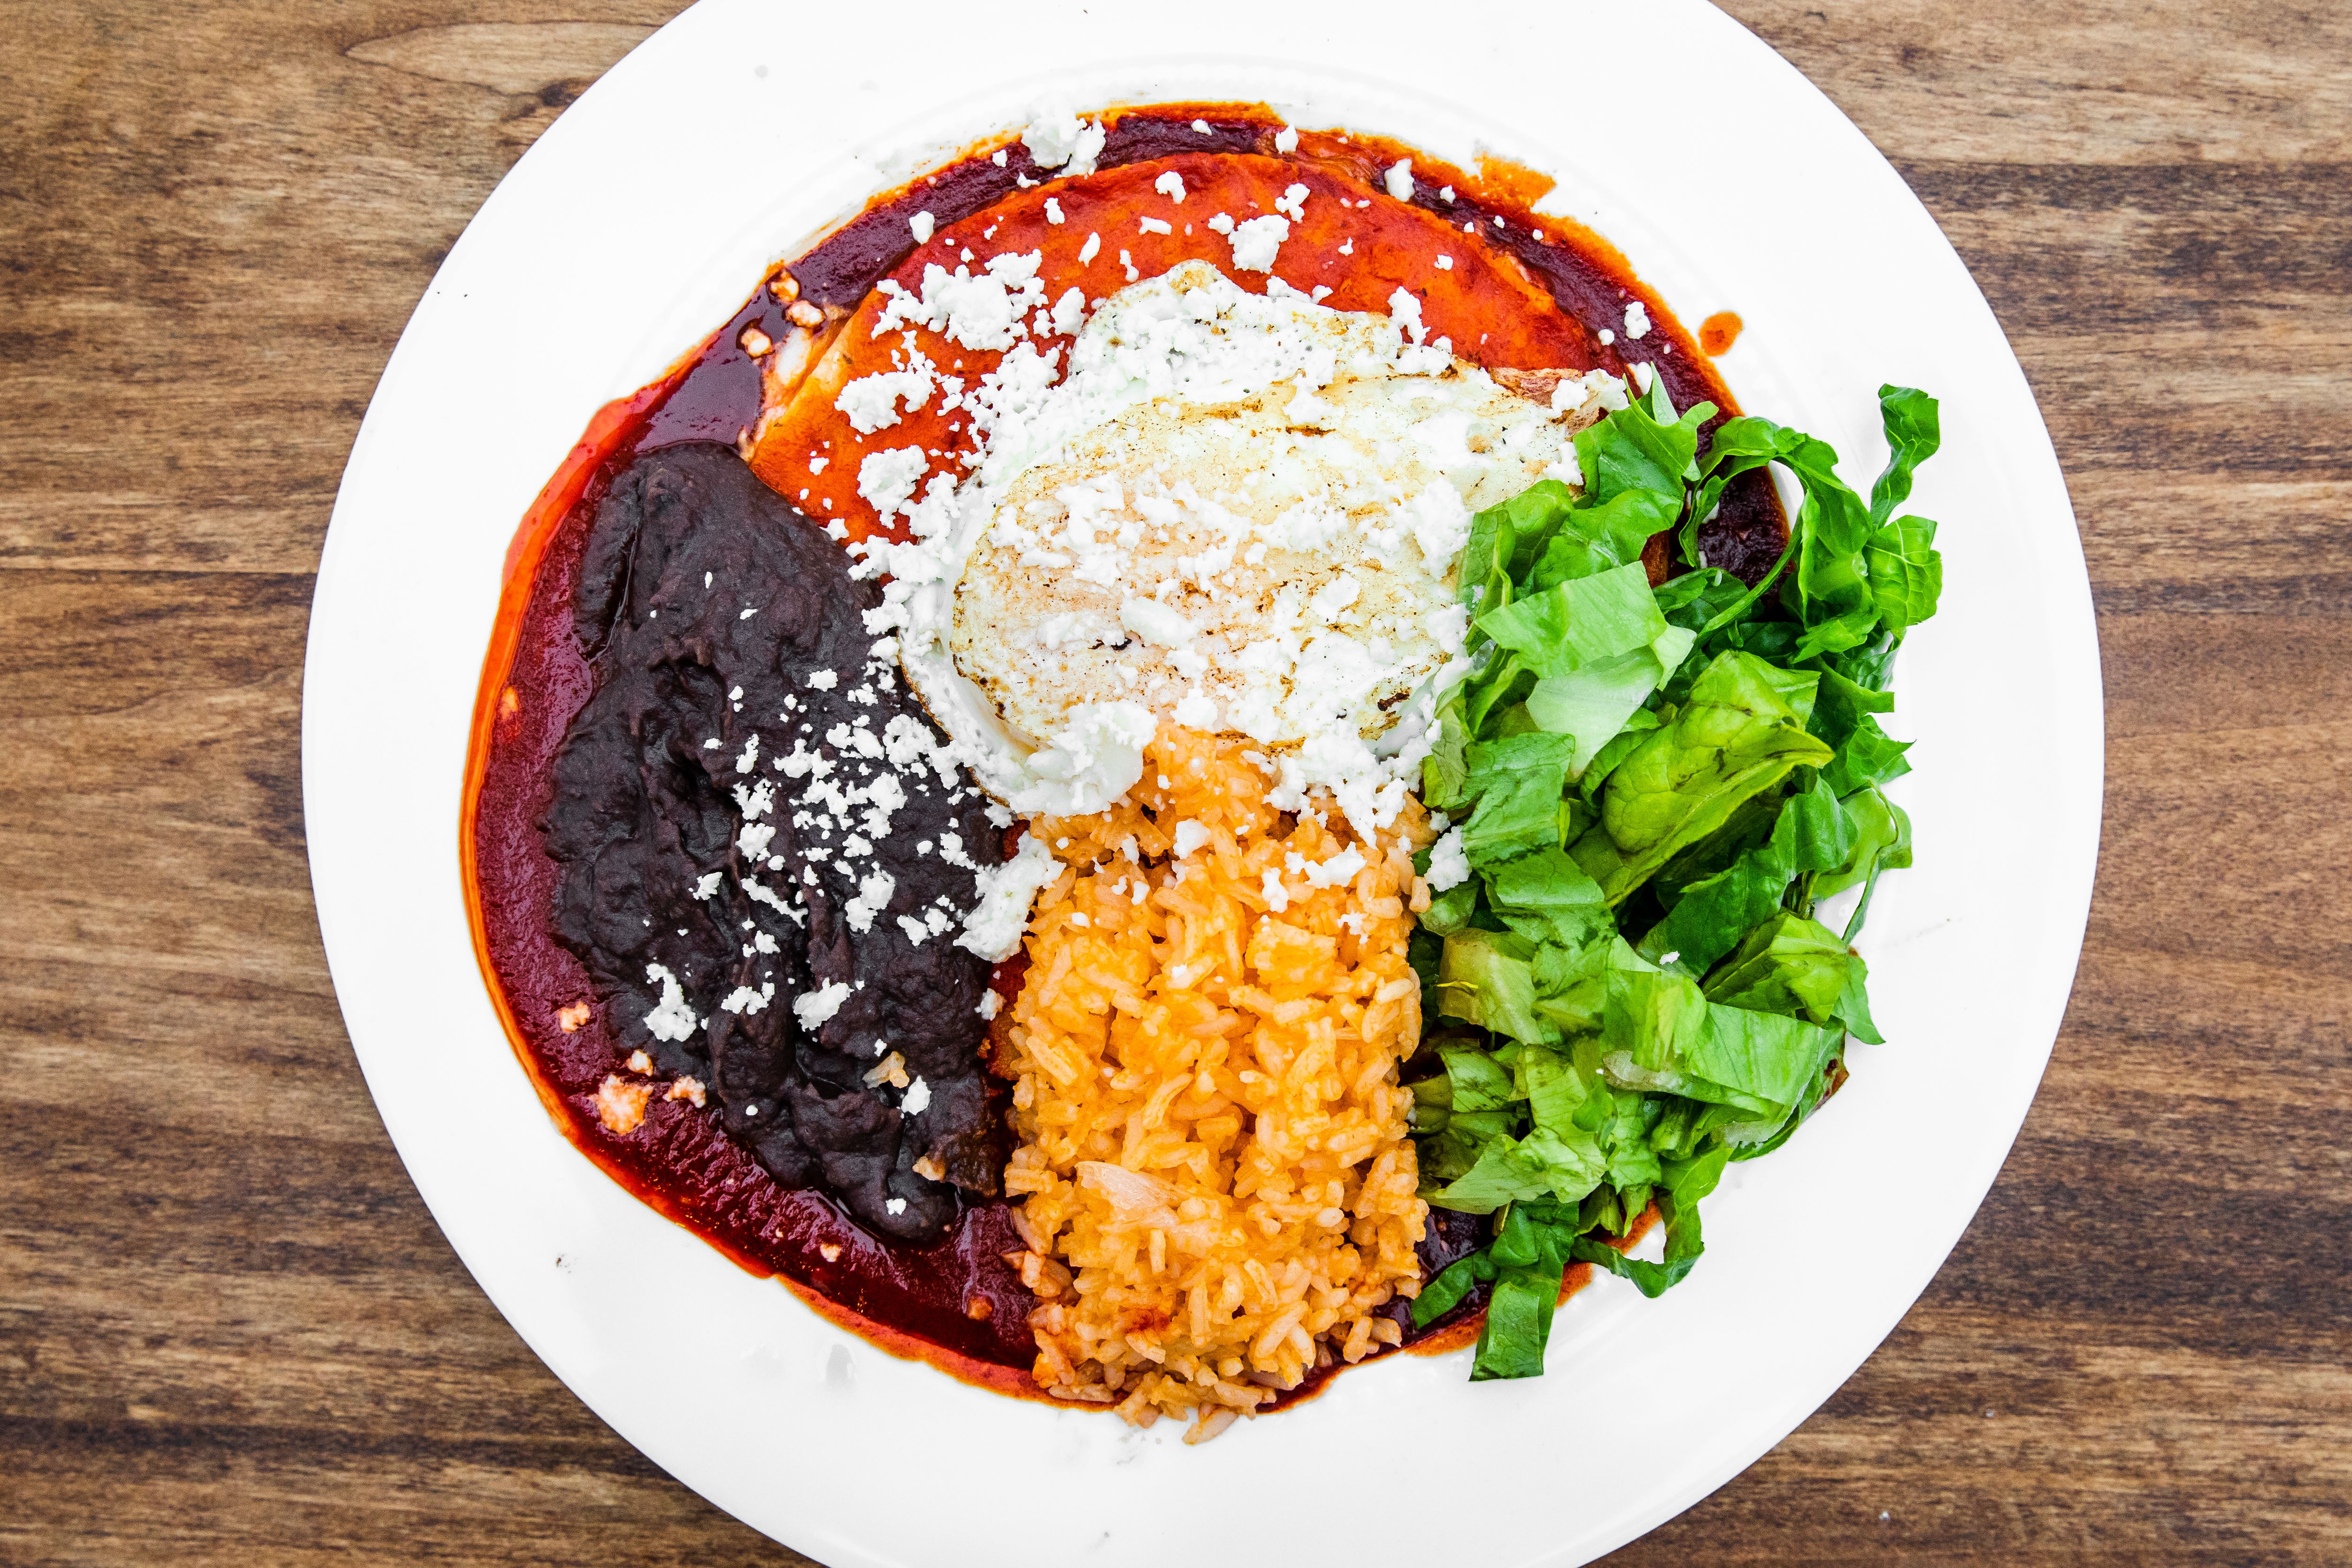 a plate of red chile enchiladas topped with cheese, mexican rice, refried beens and lettuce